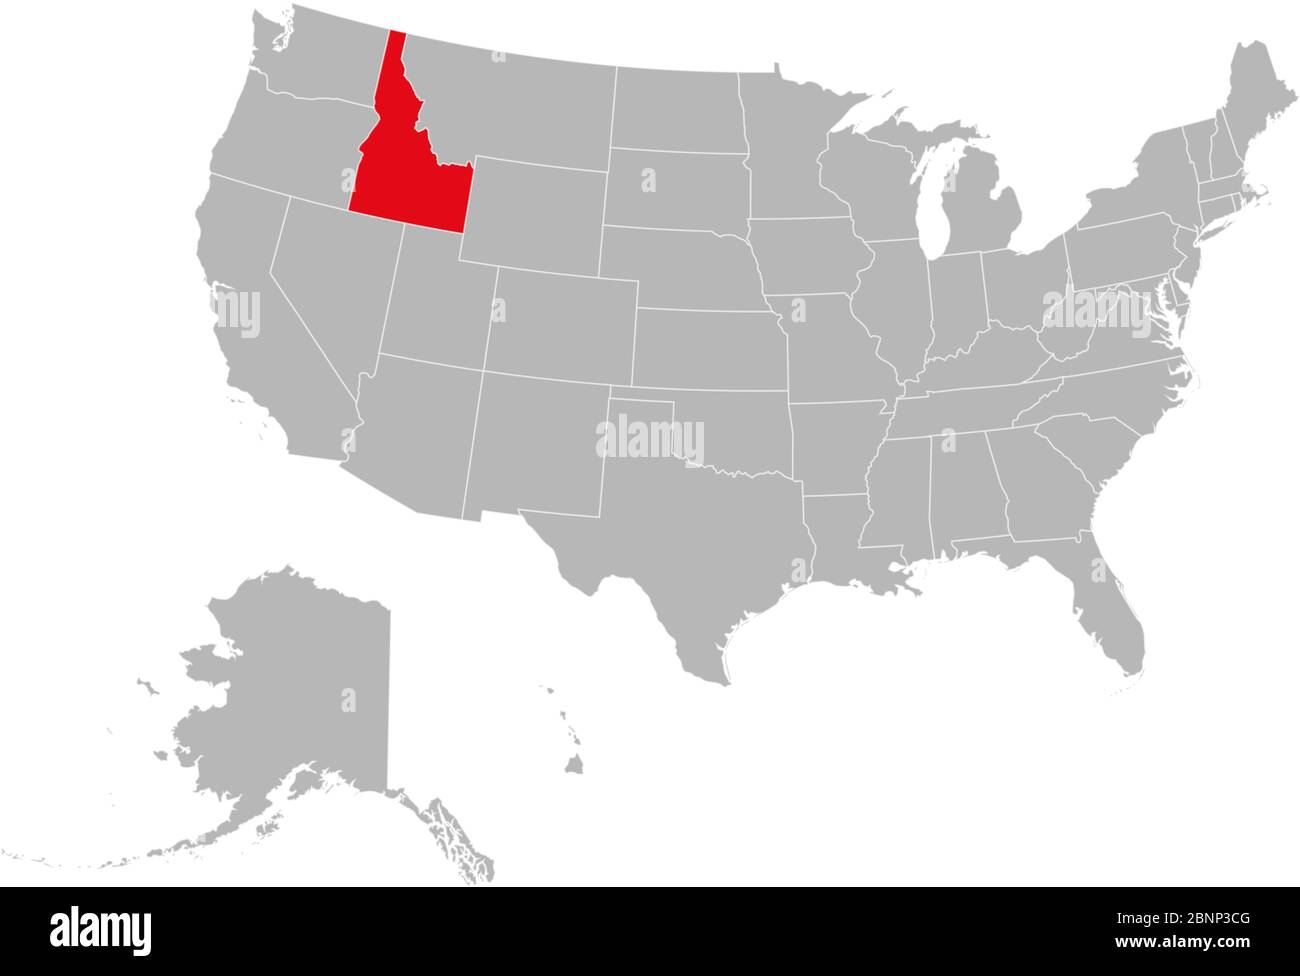 Idaho state highlighted red on USA political map vector illustration. Gray background. Stock Vector